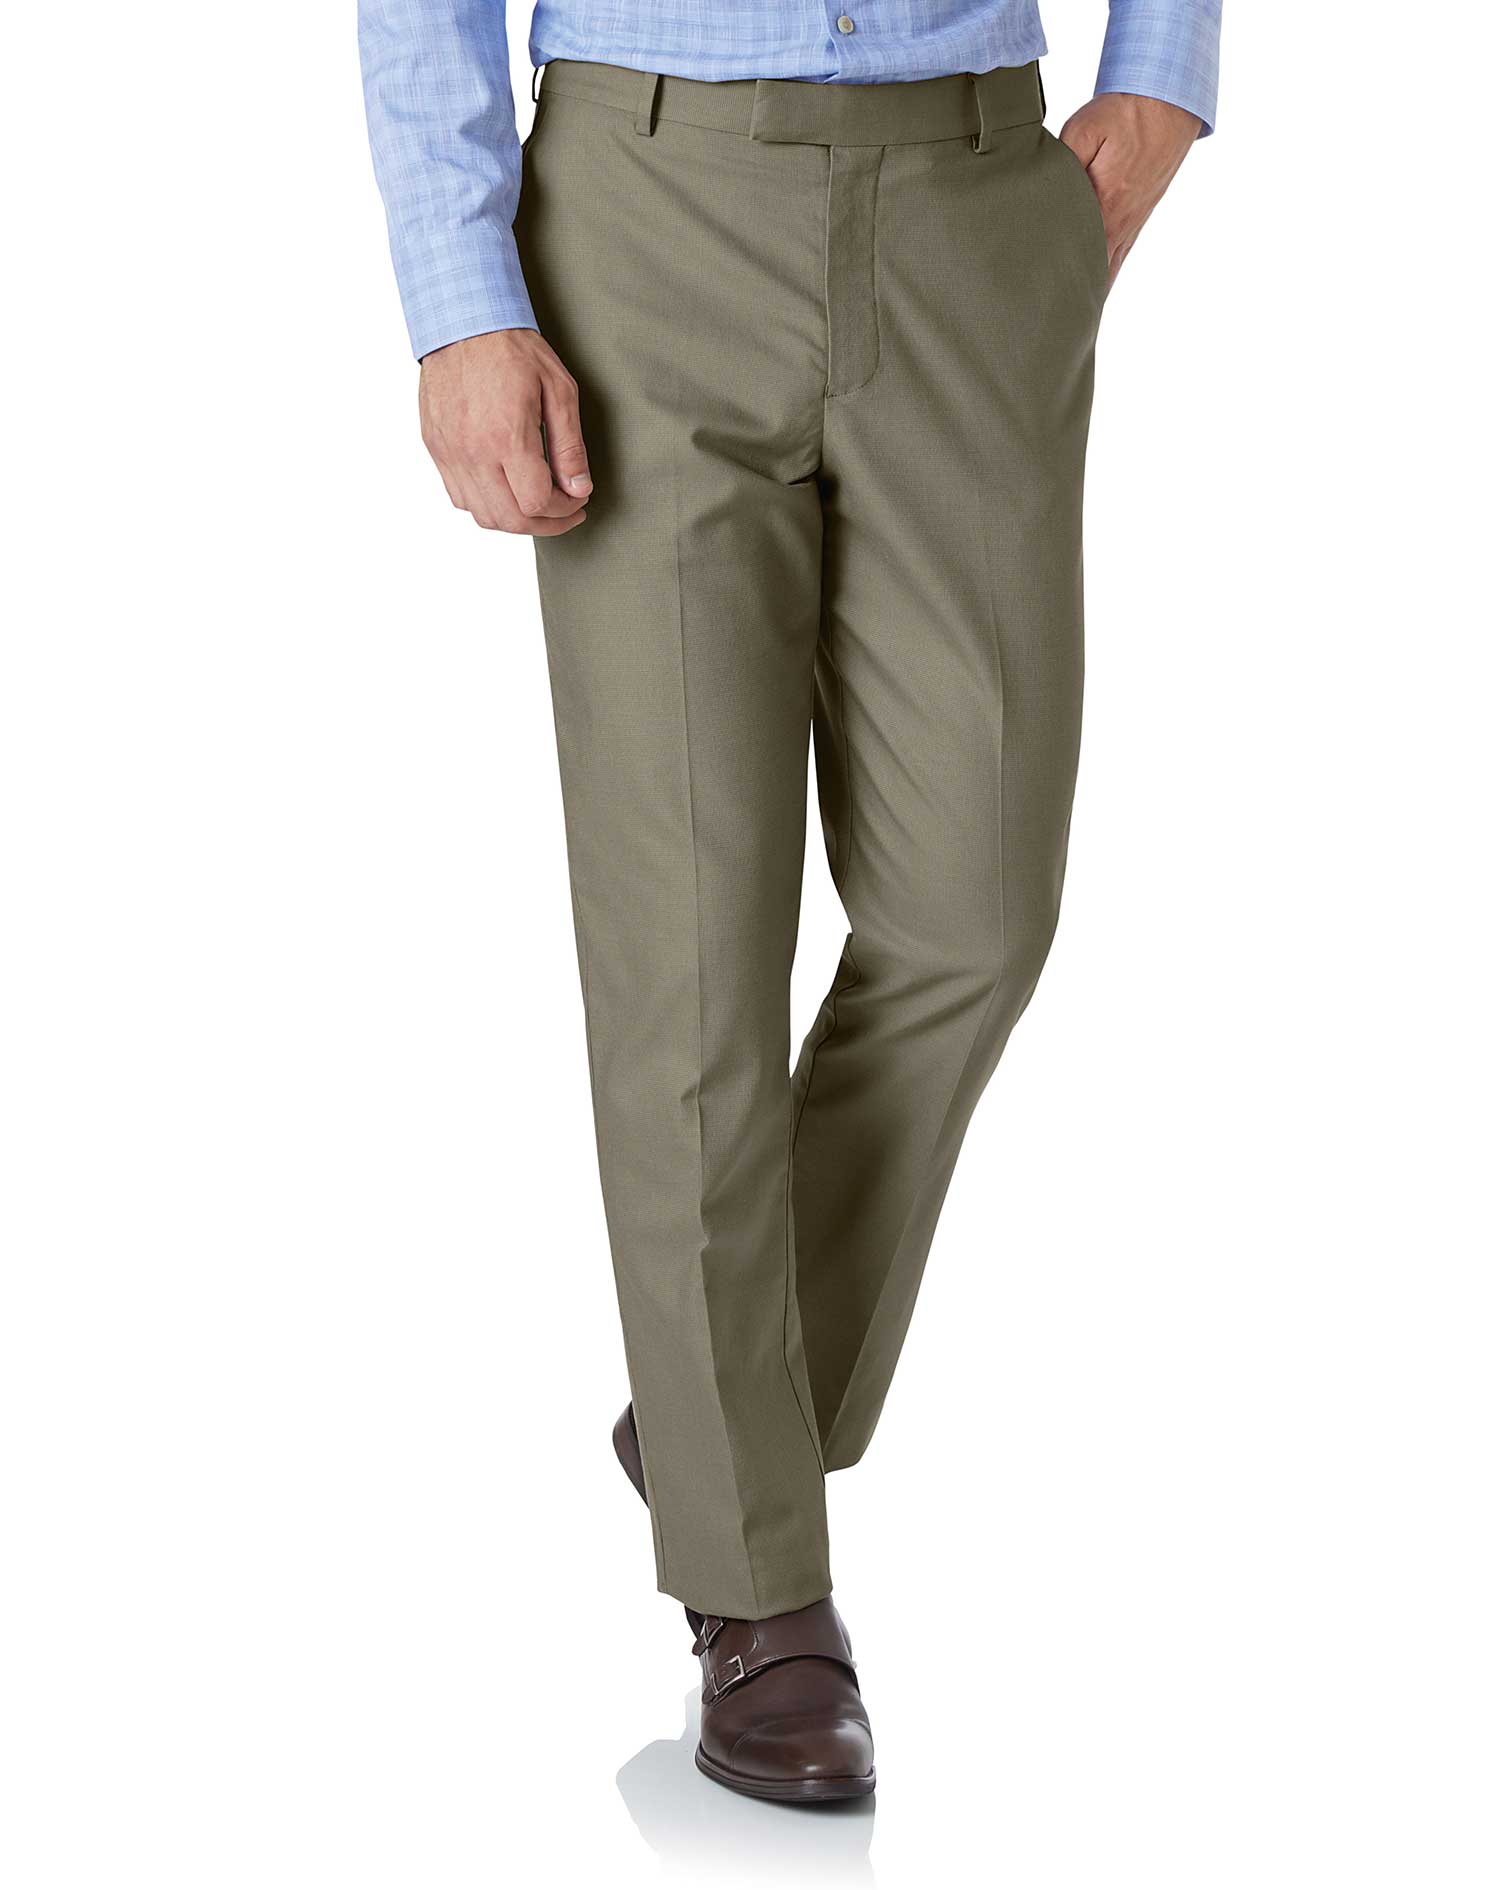 Olive Classic Fit Stretch Non-Iron Trousers Size W91 L81 by Charles Tyrwhitt